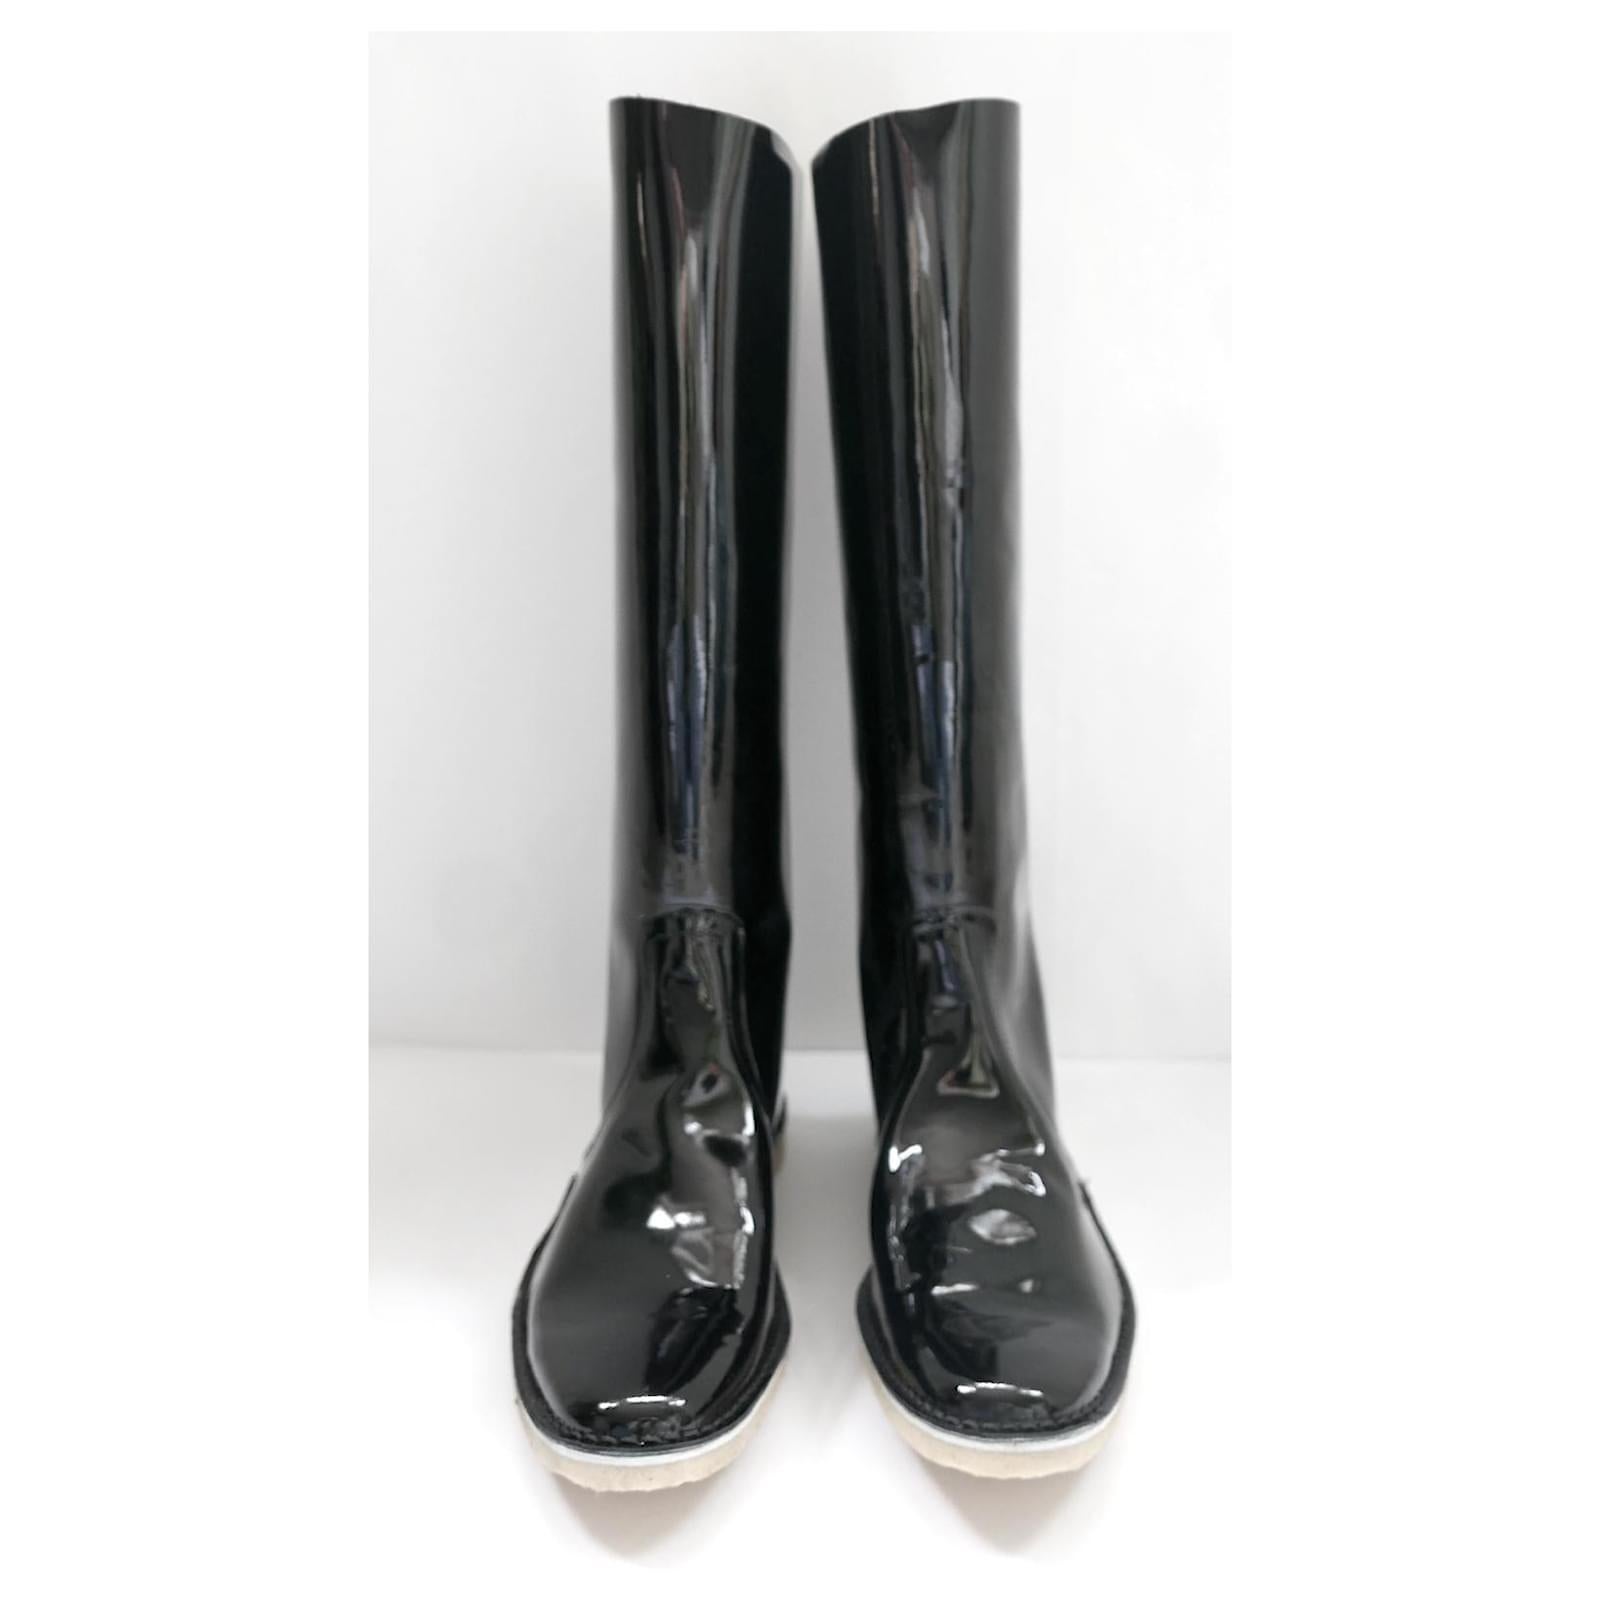 Gorgeous, unworn archival Pierre Hardy black patent leather boots with cream crepe soles and leather inners. Have a cute 1960s inspired shape with rounded toe. Size 39. Measure approx 10.”5 heel to toe and 15” at back.
